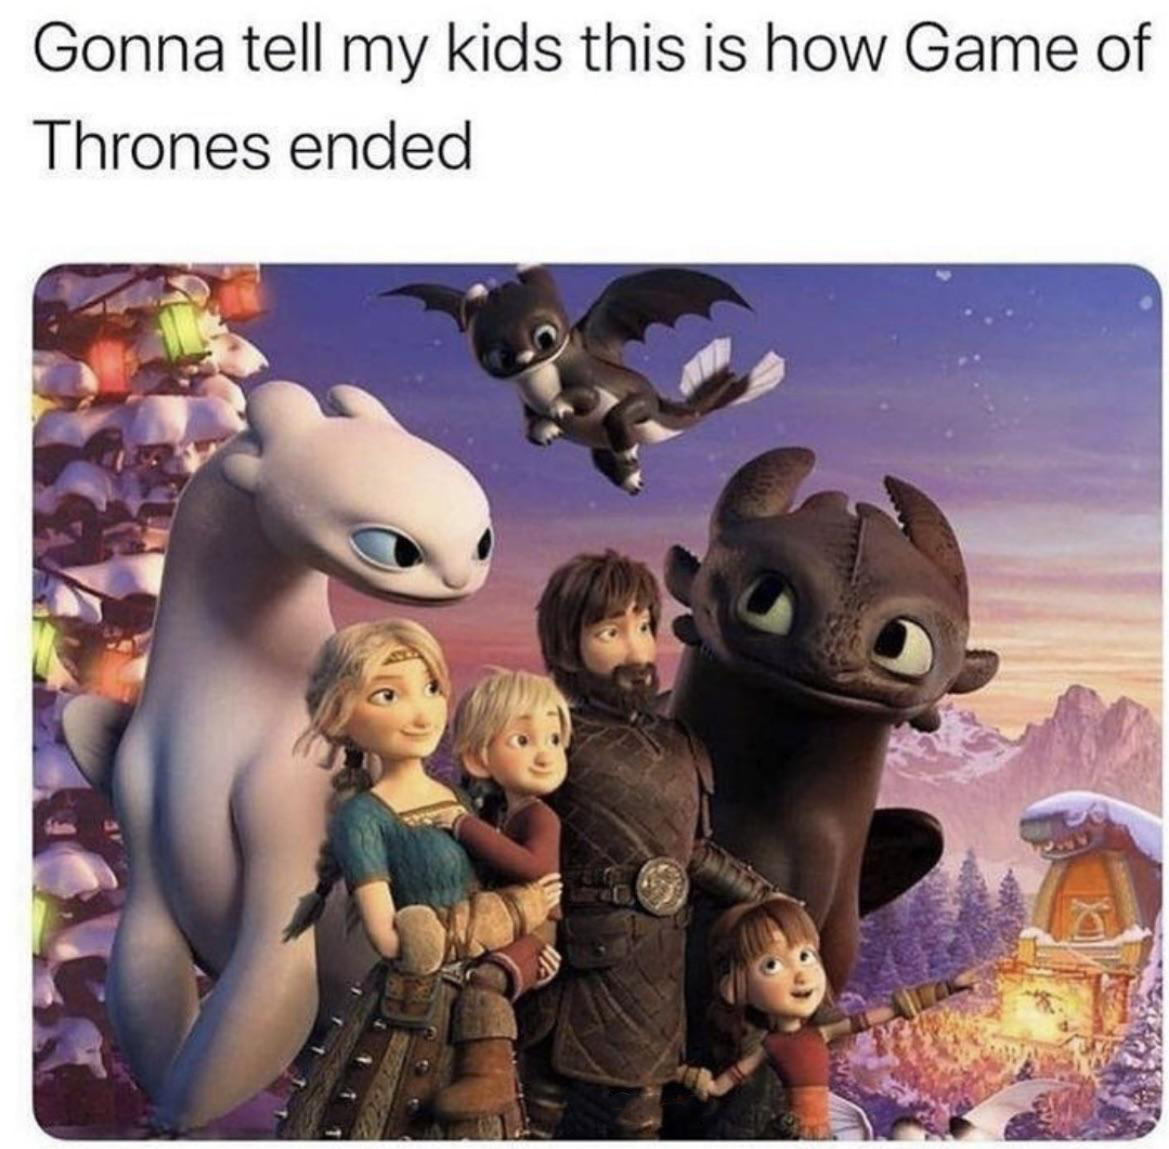 monday morning randomness - train your dragon homecoming 2019 - Gonna tell my kids this is how Game of Thrones ended